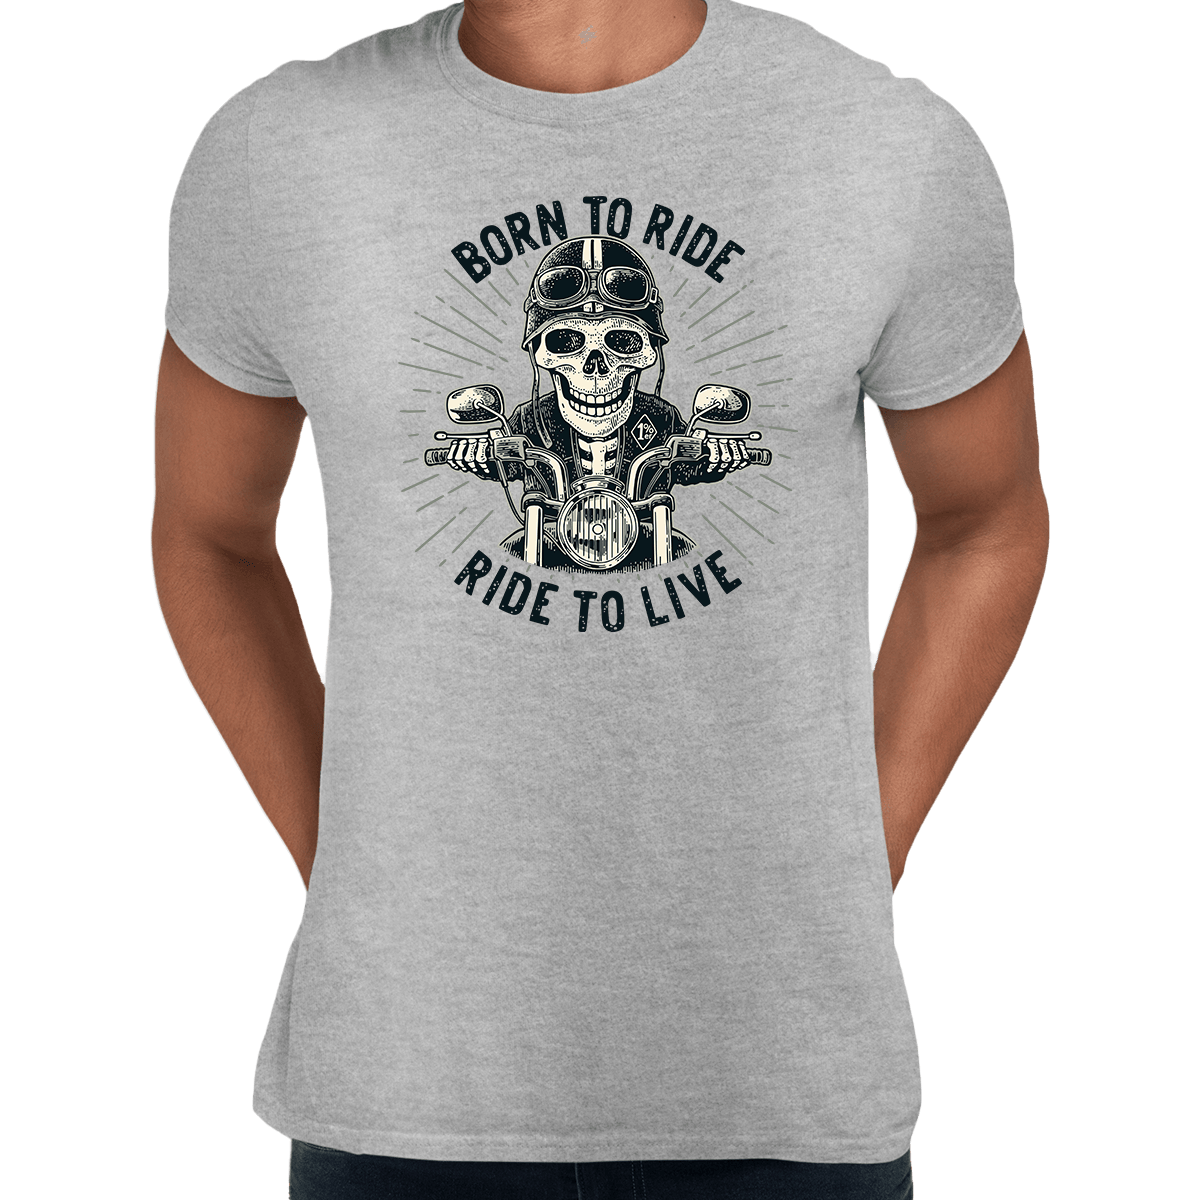 Day of the Dead Dia de los Muertos Mexican skeleton on a bike Born to ride - Kuzi Tees